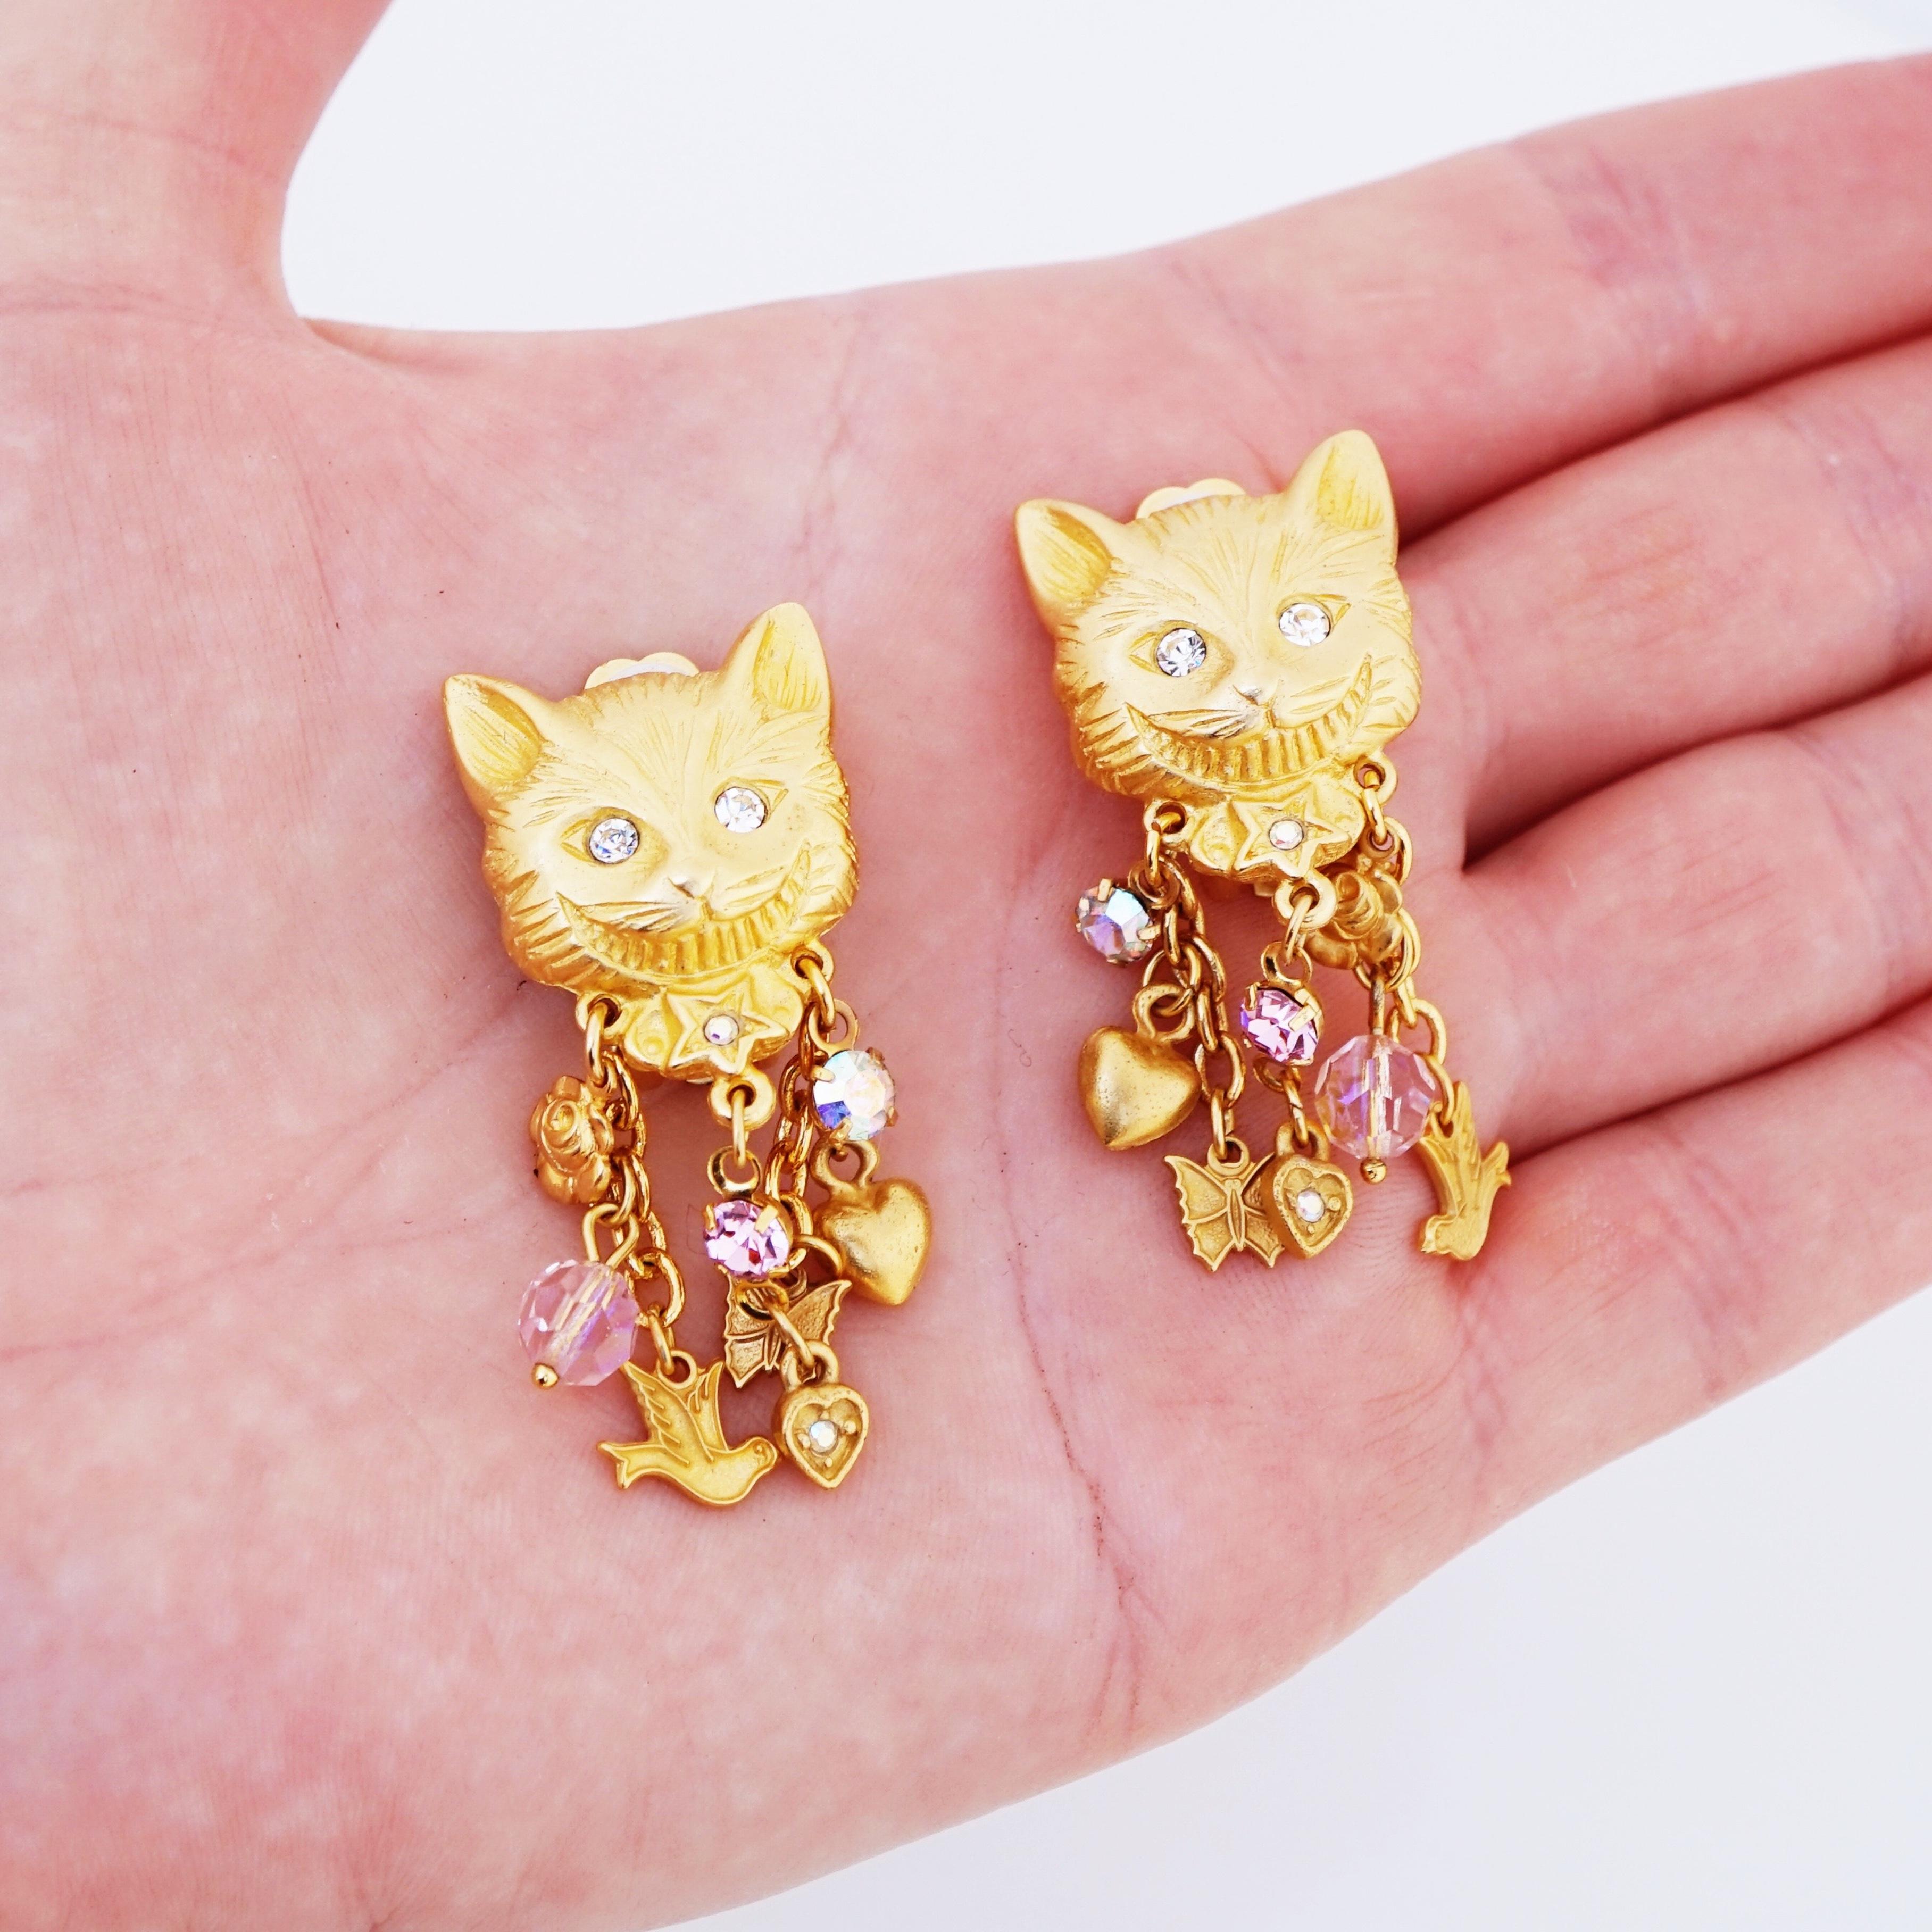 Modern Gilded Cheshire Cat Figural Earrings With Charm Dangles By Kirks Folly, 1980s For Sale